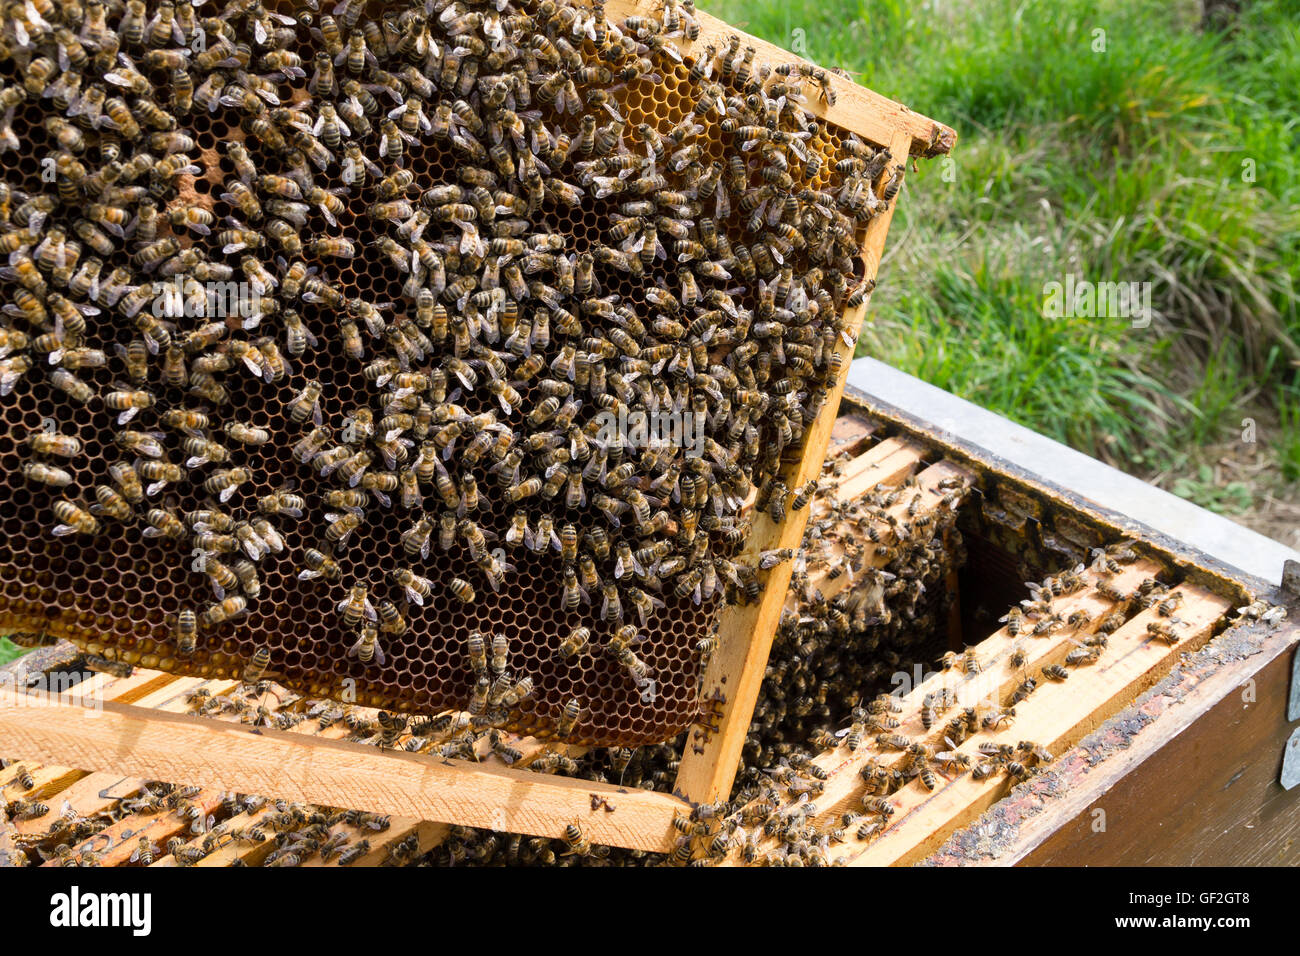 Open hive detail. Beekeeping, agriculture, rural life. Stock Photo